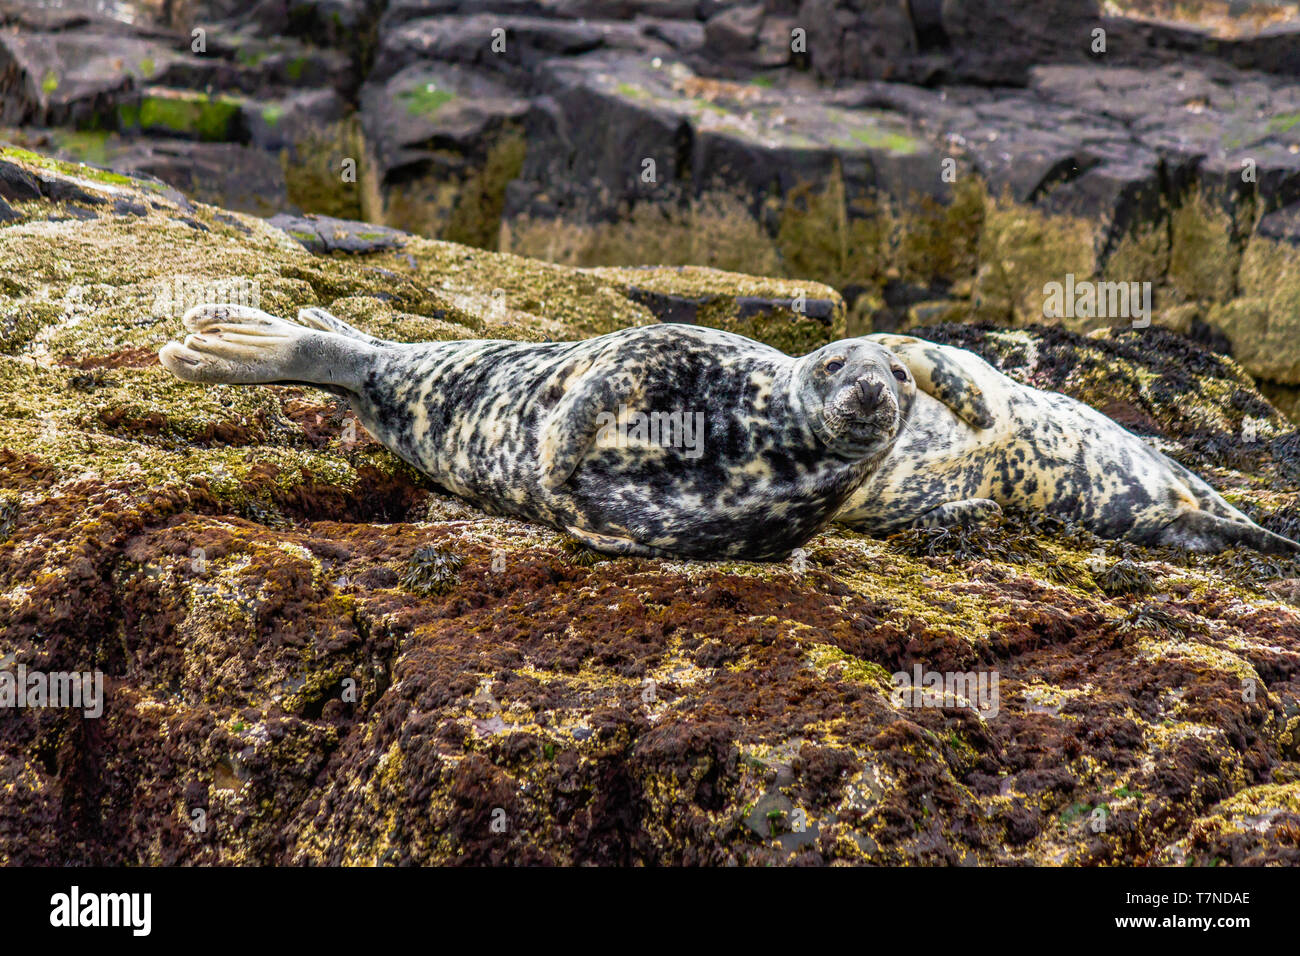 Colony of Grey Seals at home on the Farne Islands, Northumberland, UK. May 2018. Stock Photo